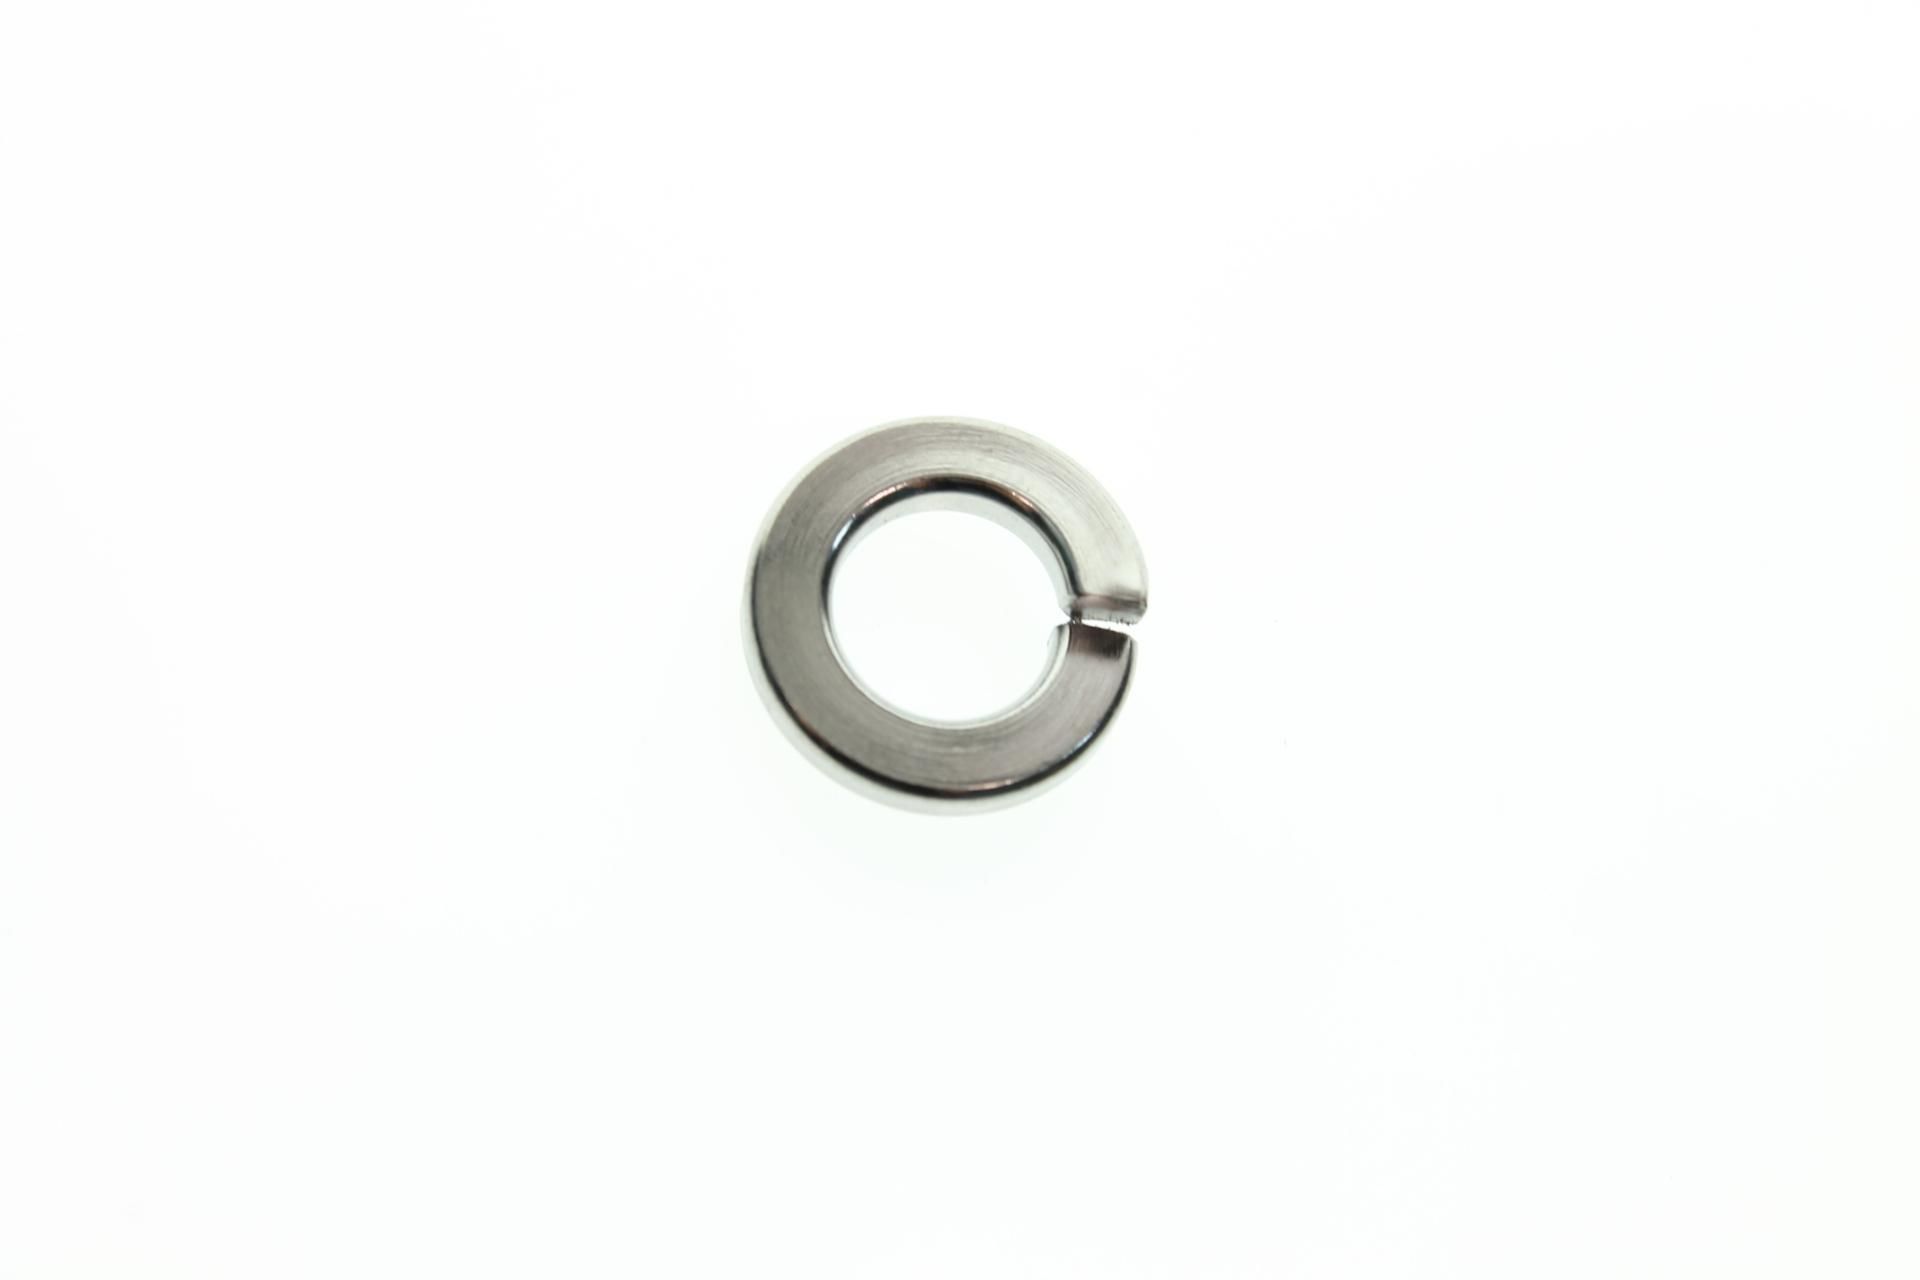 08321-21082 Superseded by 08321-01087 - LOCK WASHER